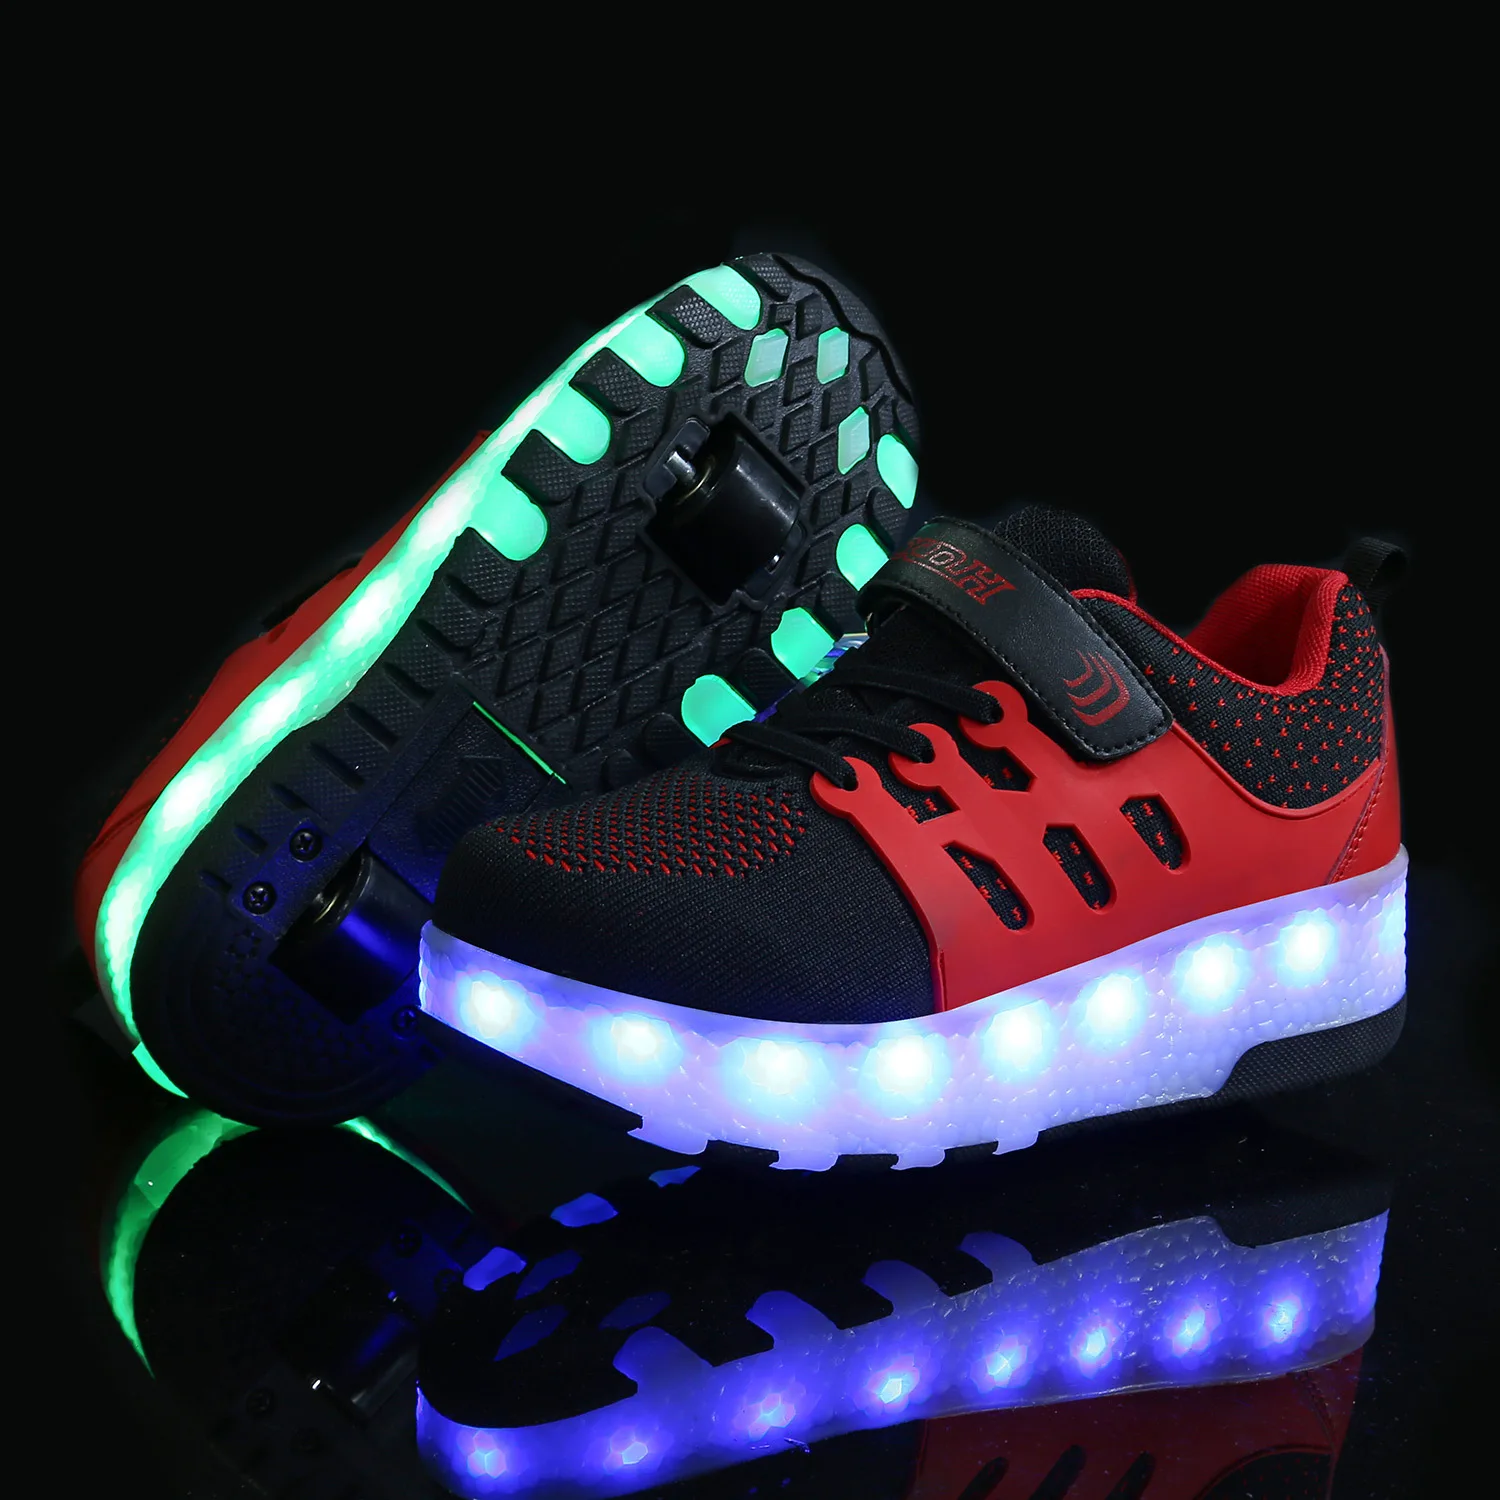 Children LED Shoes Air Mesh Breathable USB Charging Boys & Girls Roller Skates Fashion Kids Sneakers Size 28-40 1 22 133 136pcs universal phone charging port dust plug dust mesh stickers portable dustproof cleaning brush phone cleaner kit